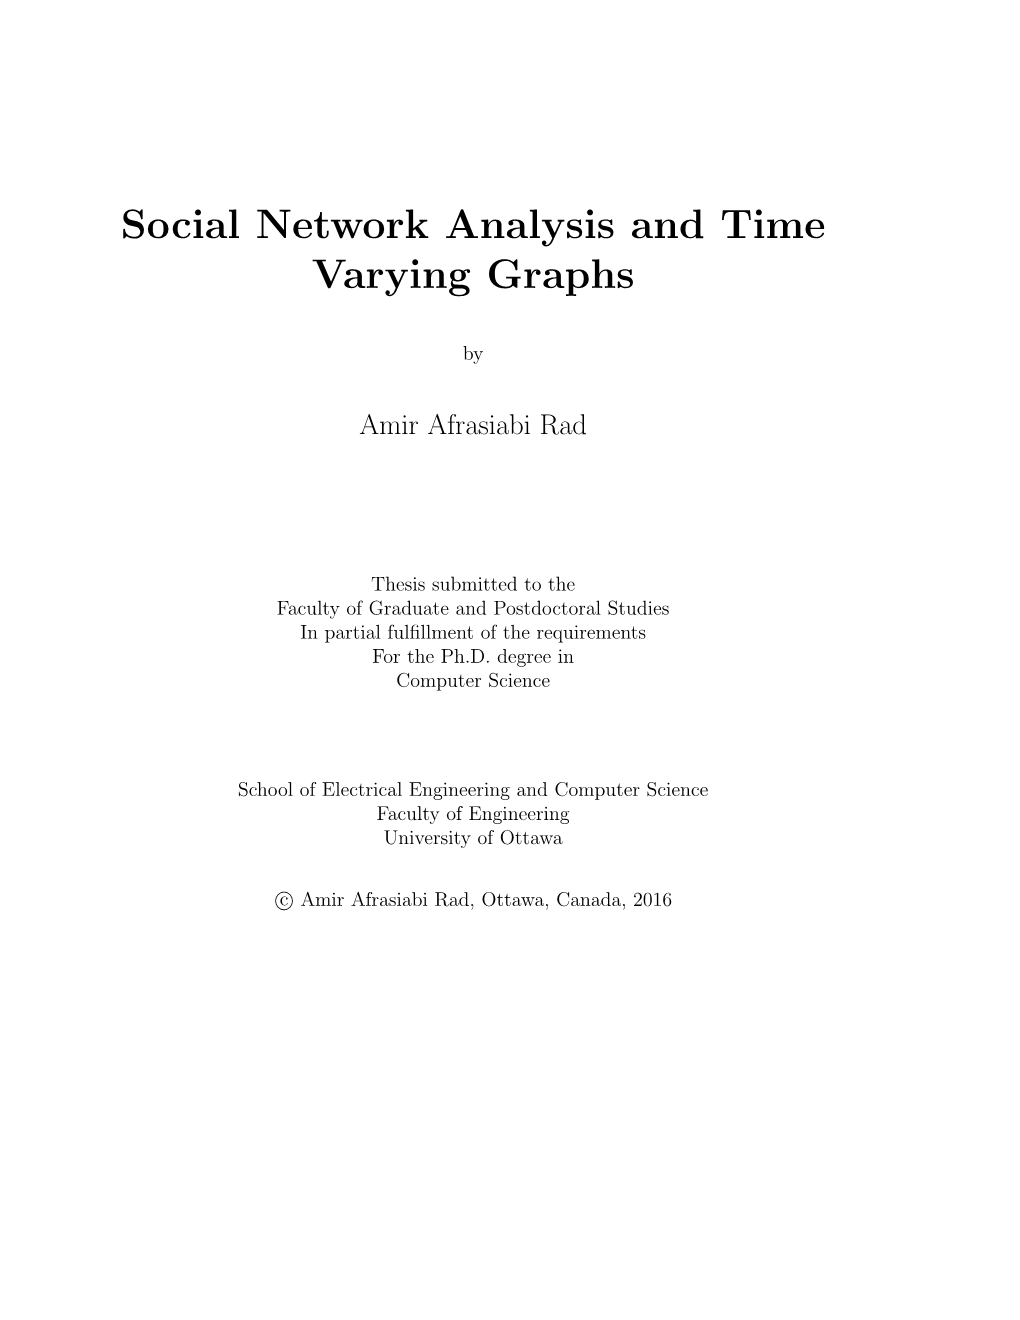 Social Network Analysis and Time Varying Graphs